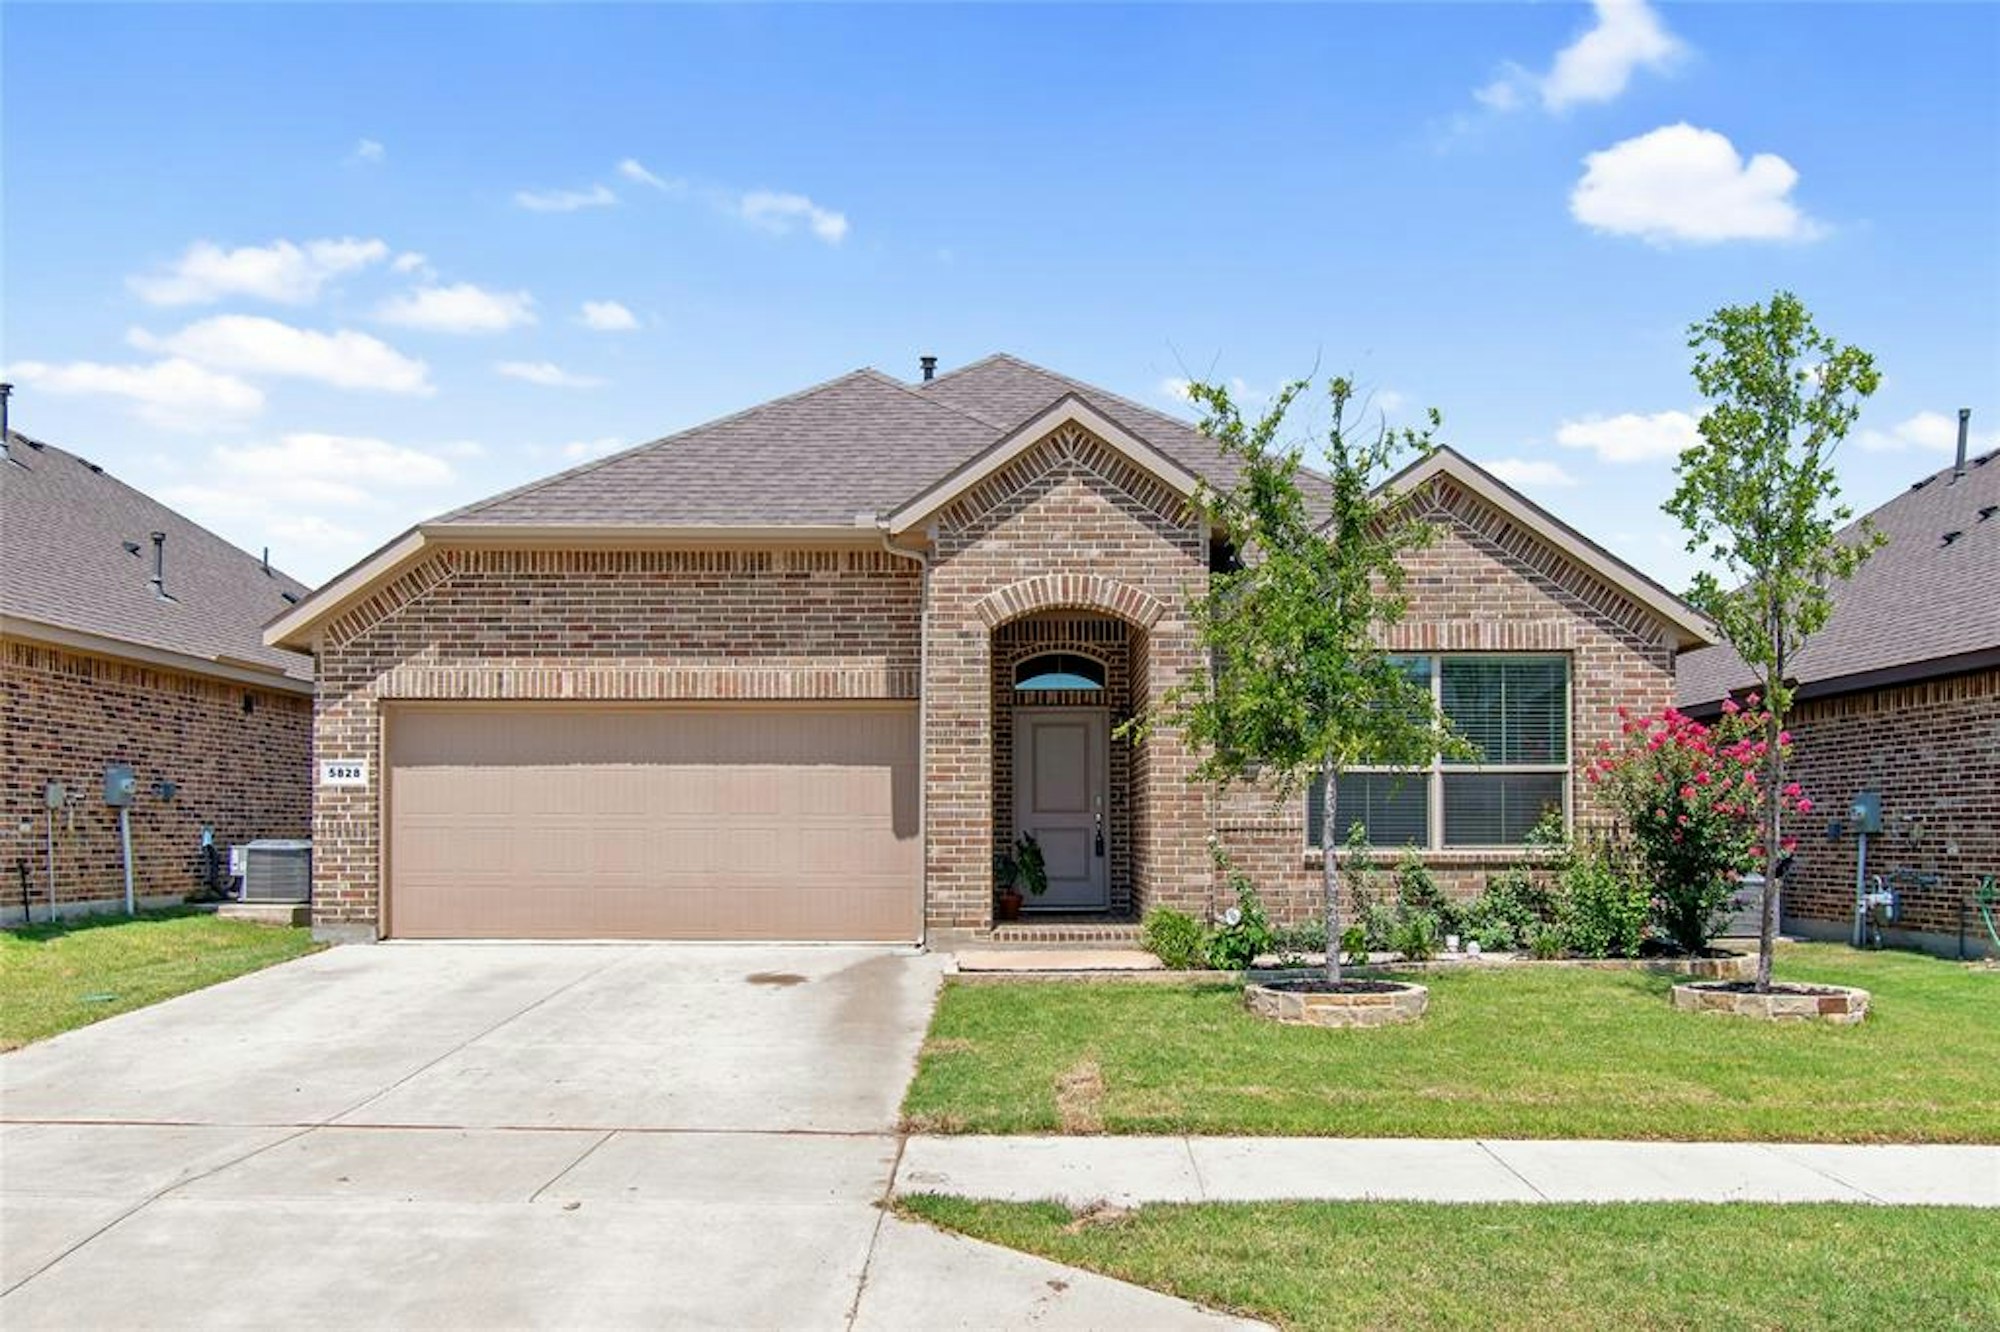 Photo 1 of 40 - 5828 Stream Dr, Fort Worth, TX 76137